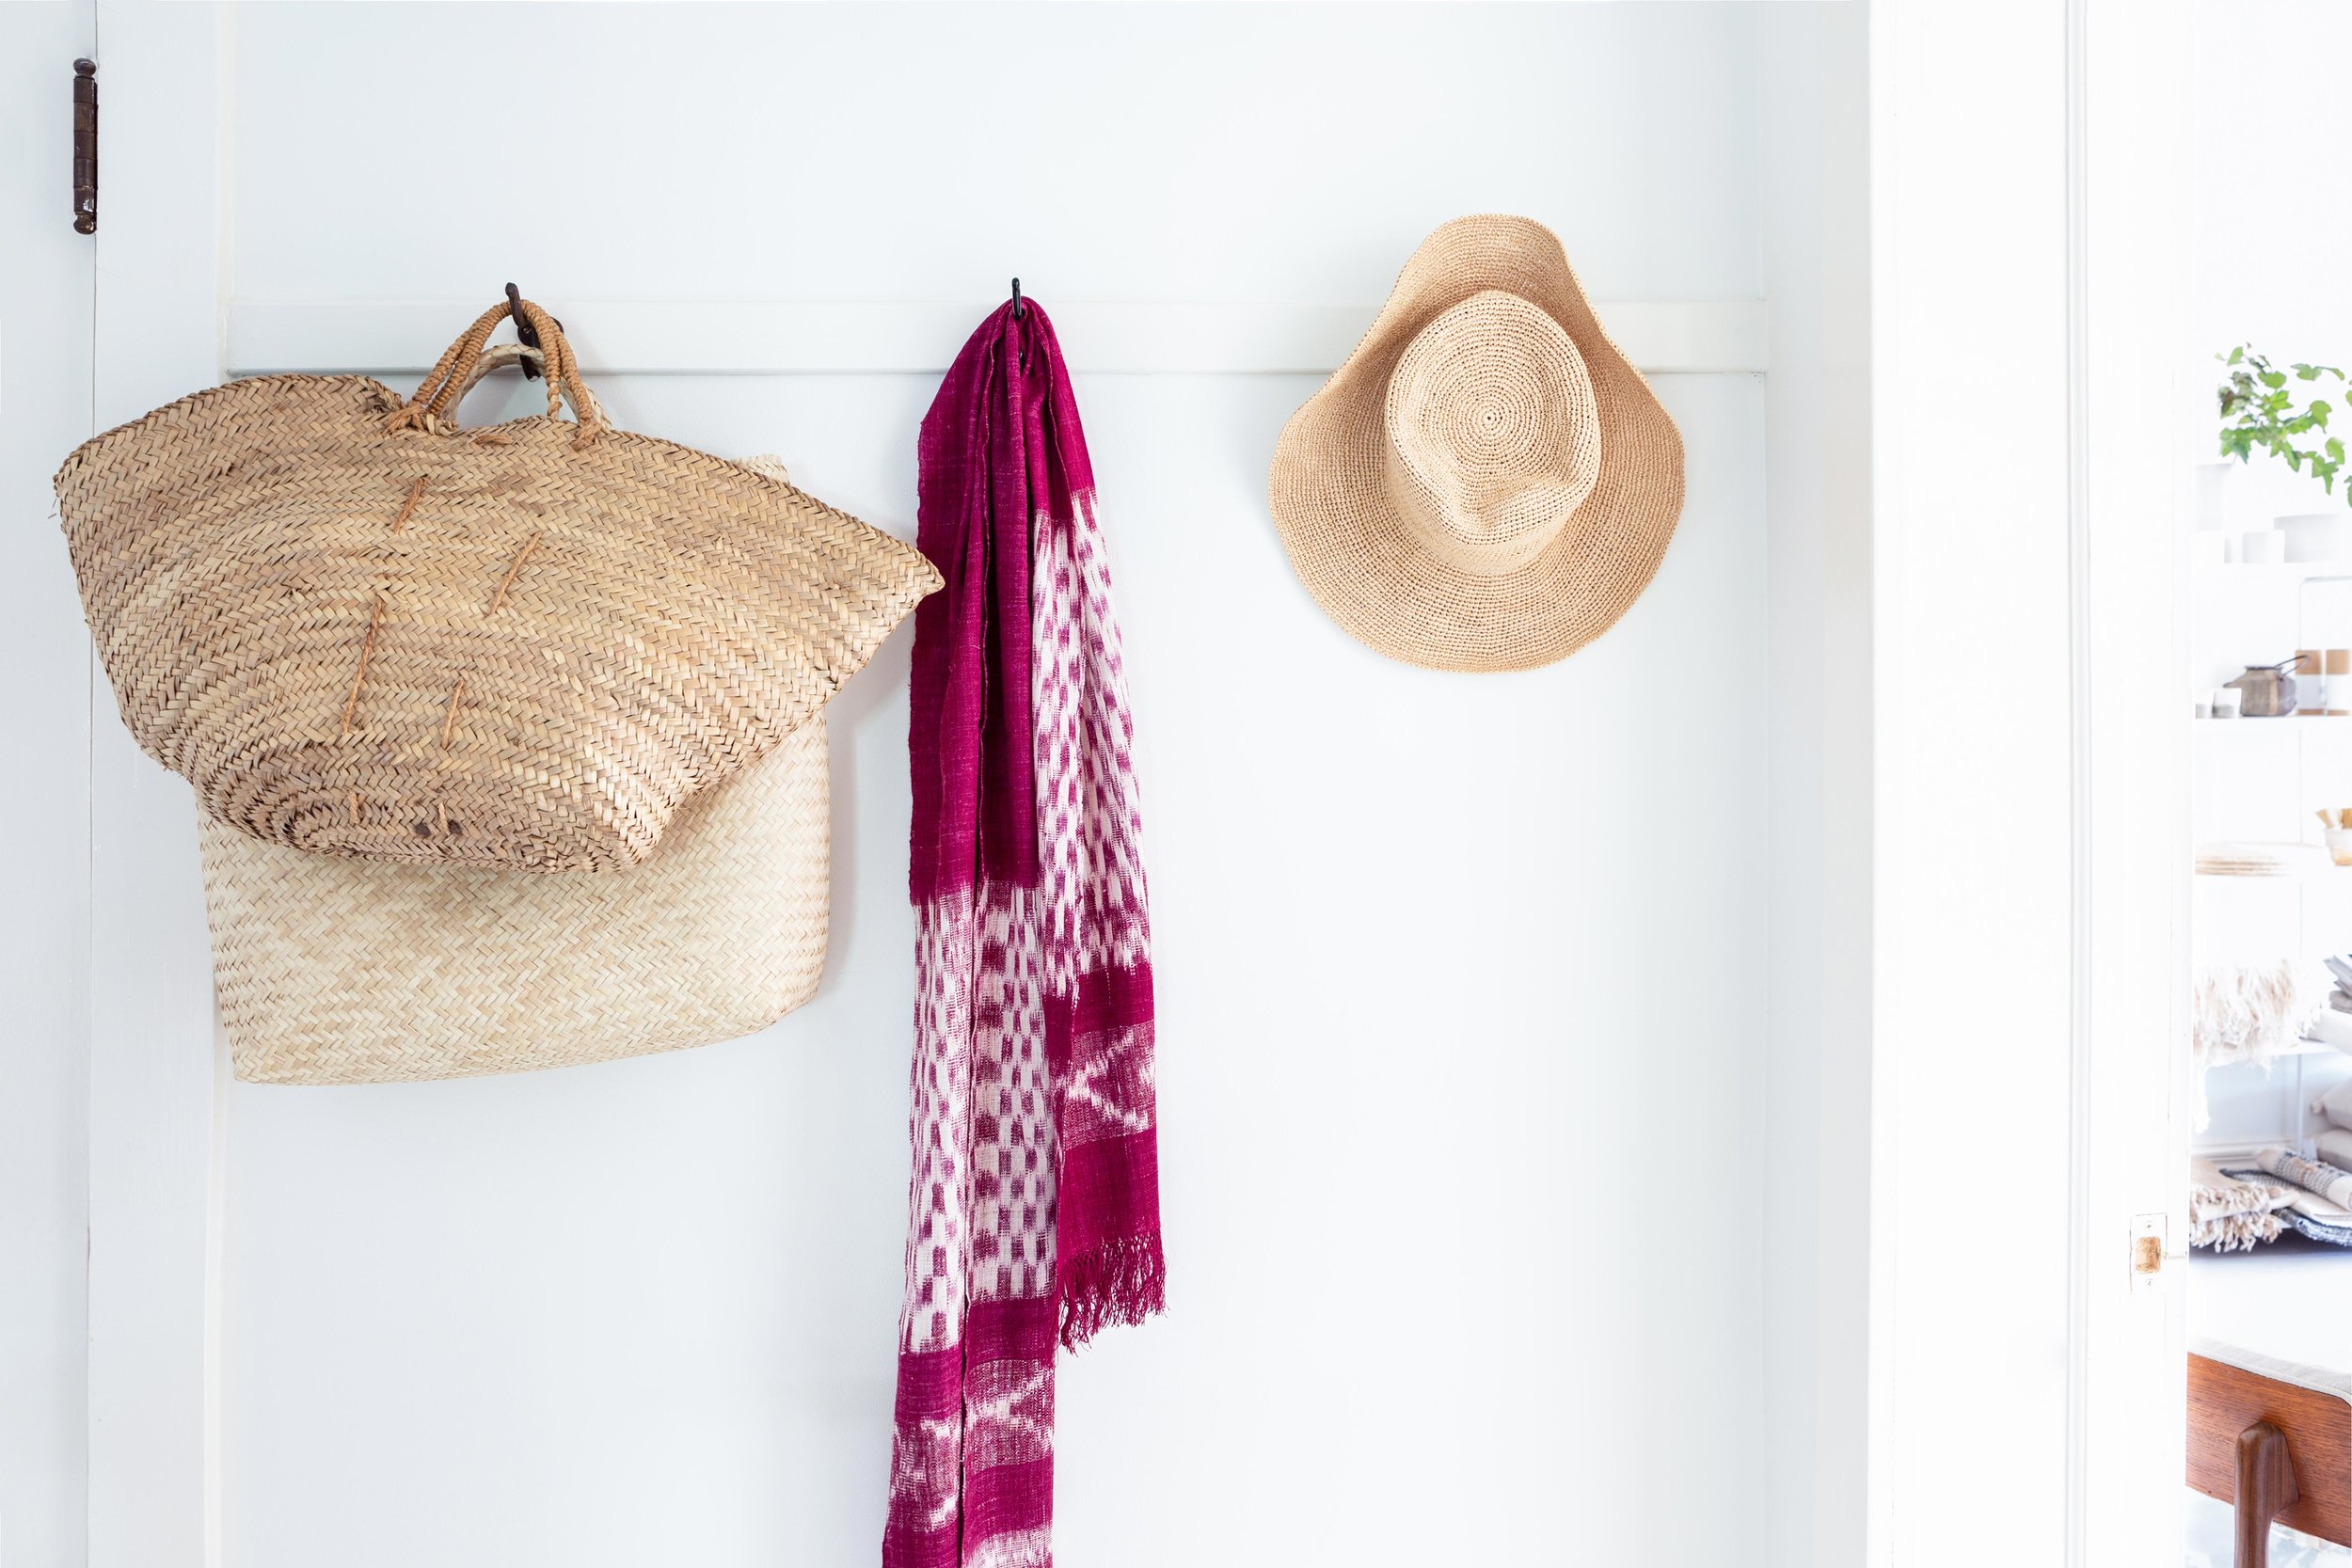 Big handwoven bags, an artisan-crafted sun hat, a lightweight wool scarf: just a few things guests might need for the beaches and streets of Lakeside, Michigan.